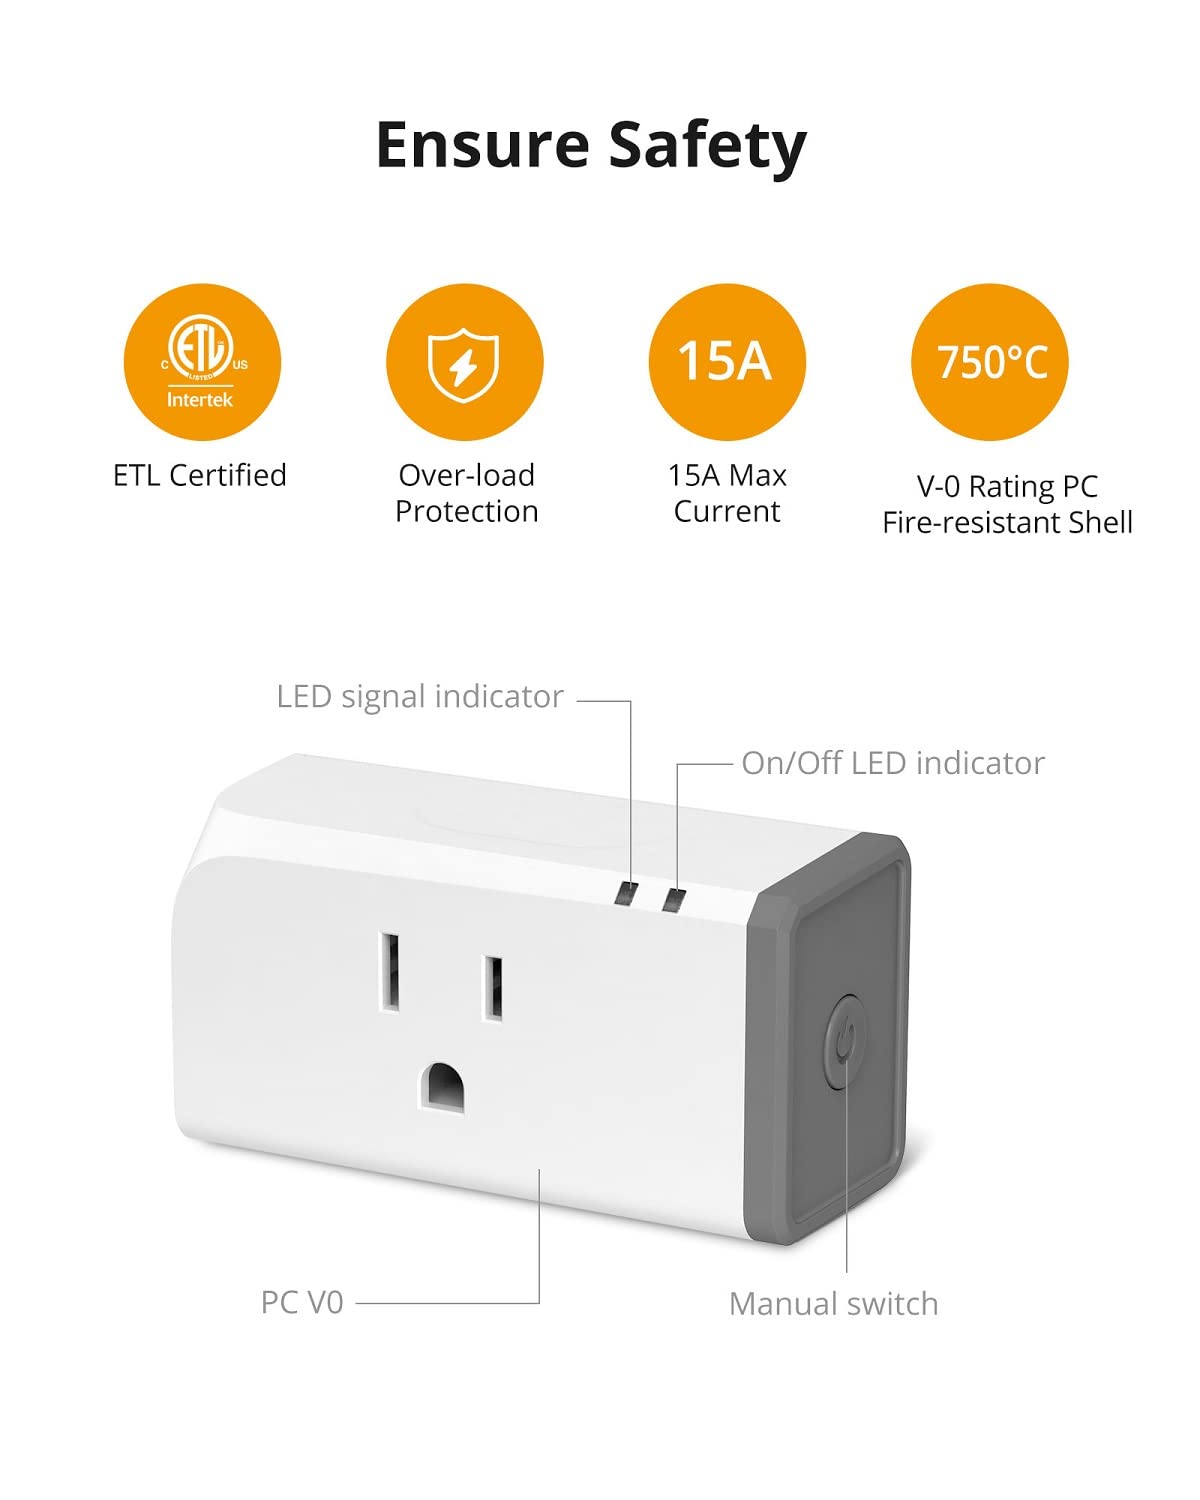 SONOFF S31 WiFi Smart Plug with Energy Monitoring, 15A Smart Outlet Socket ETL Certified, Work with Alexa & Google Home Assistant, IFTTT Supporting, 2.4 Ghz WiFi Only (1-Pack)